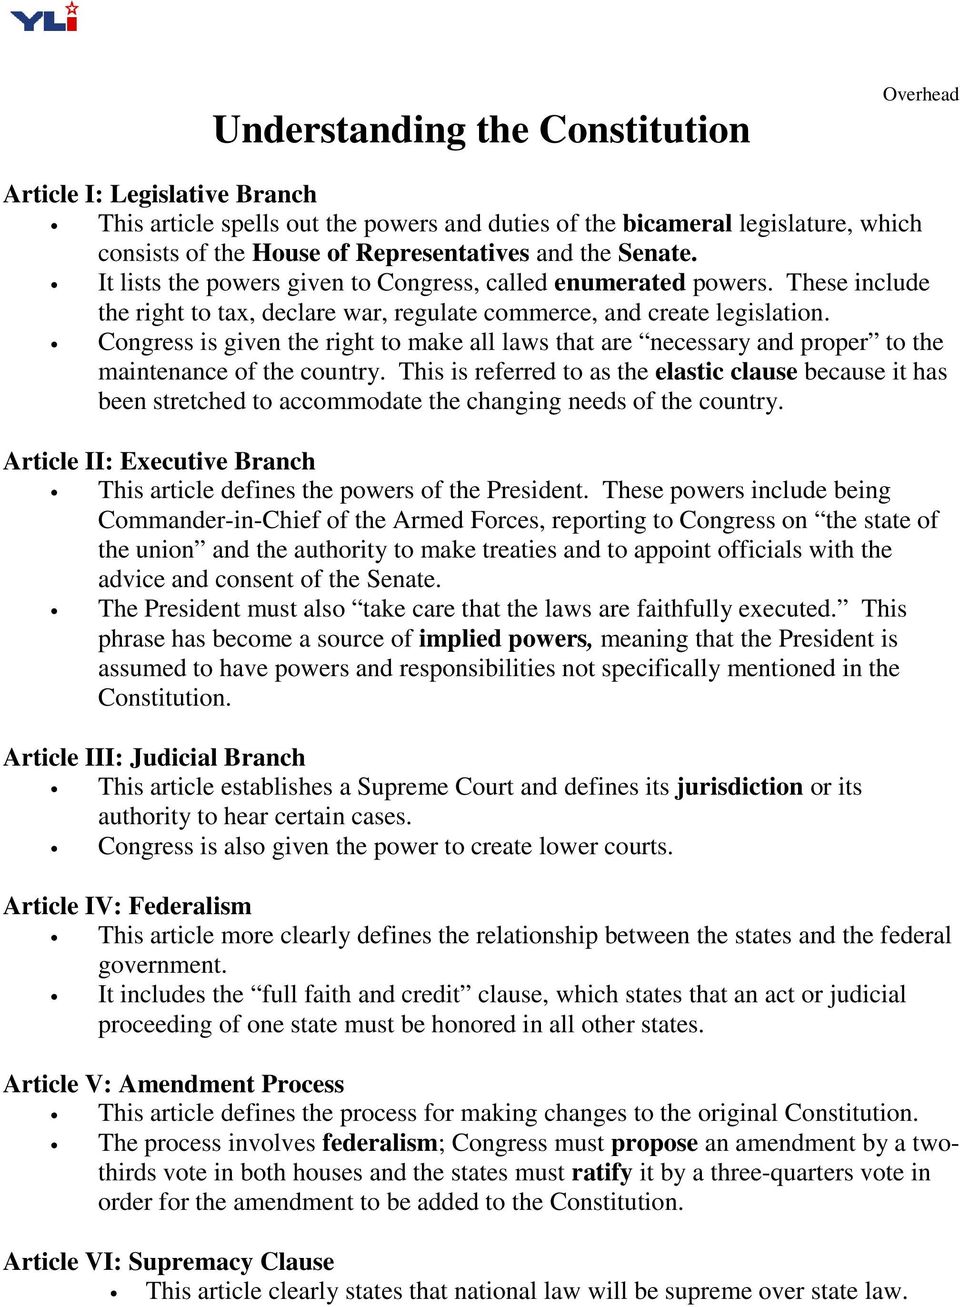 Four Key Constitutional Principles - PDF Free Download Throughout Constitutional Principles Worksheet Answers